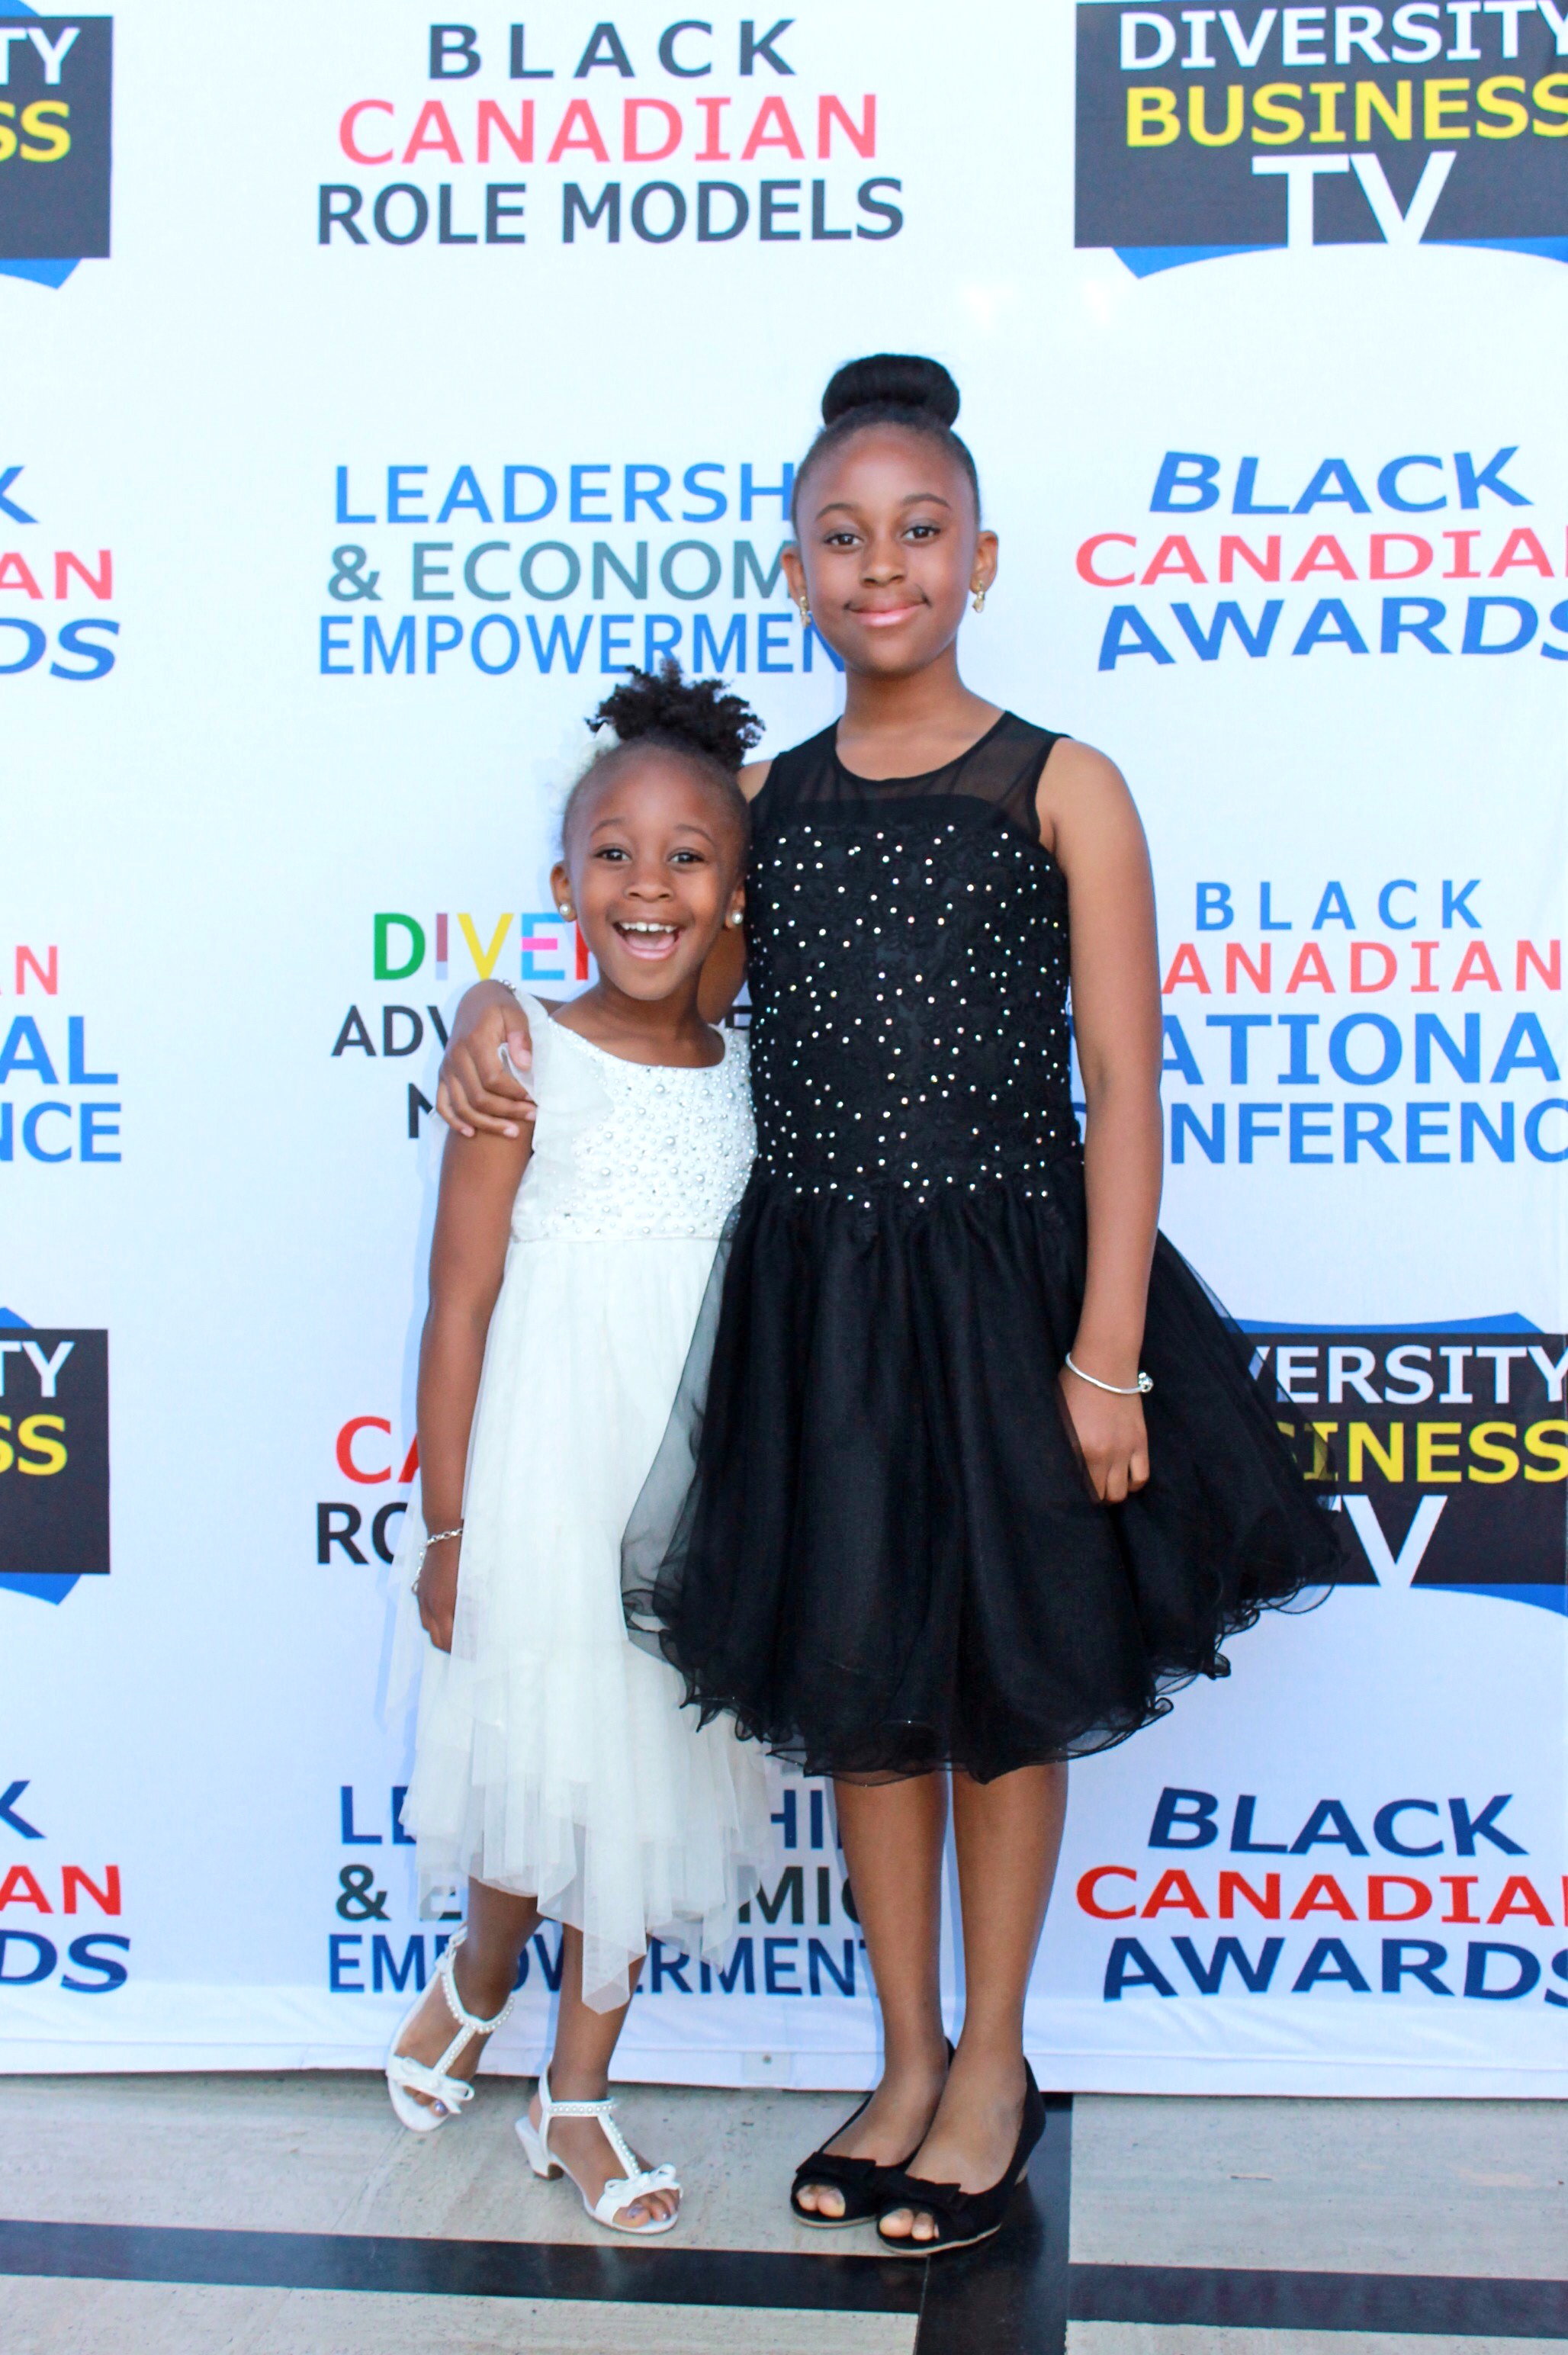 Allison and her sister Ava at the 2015 Black Canadian Awards in Toronto, Canada